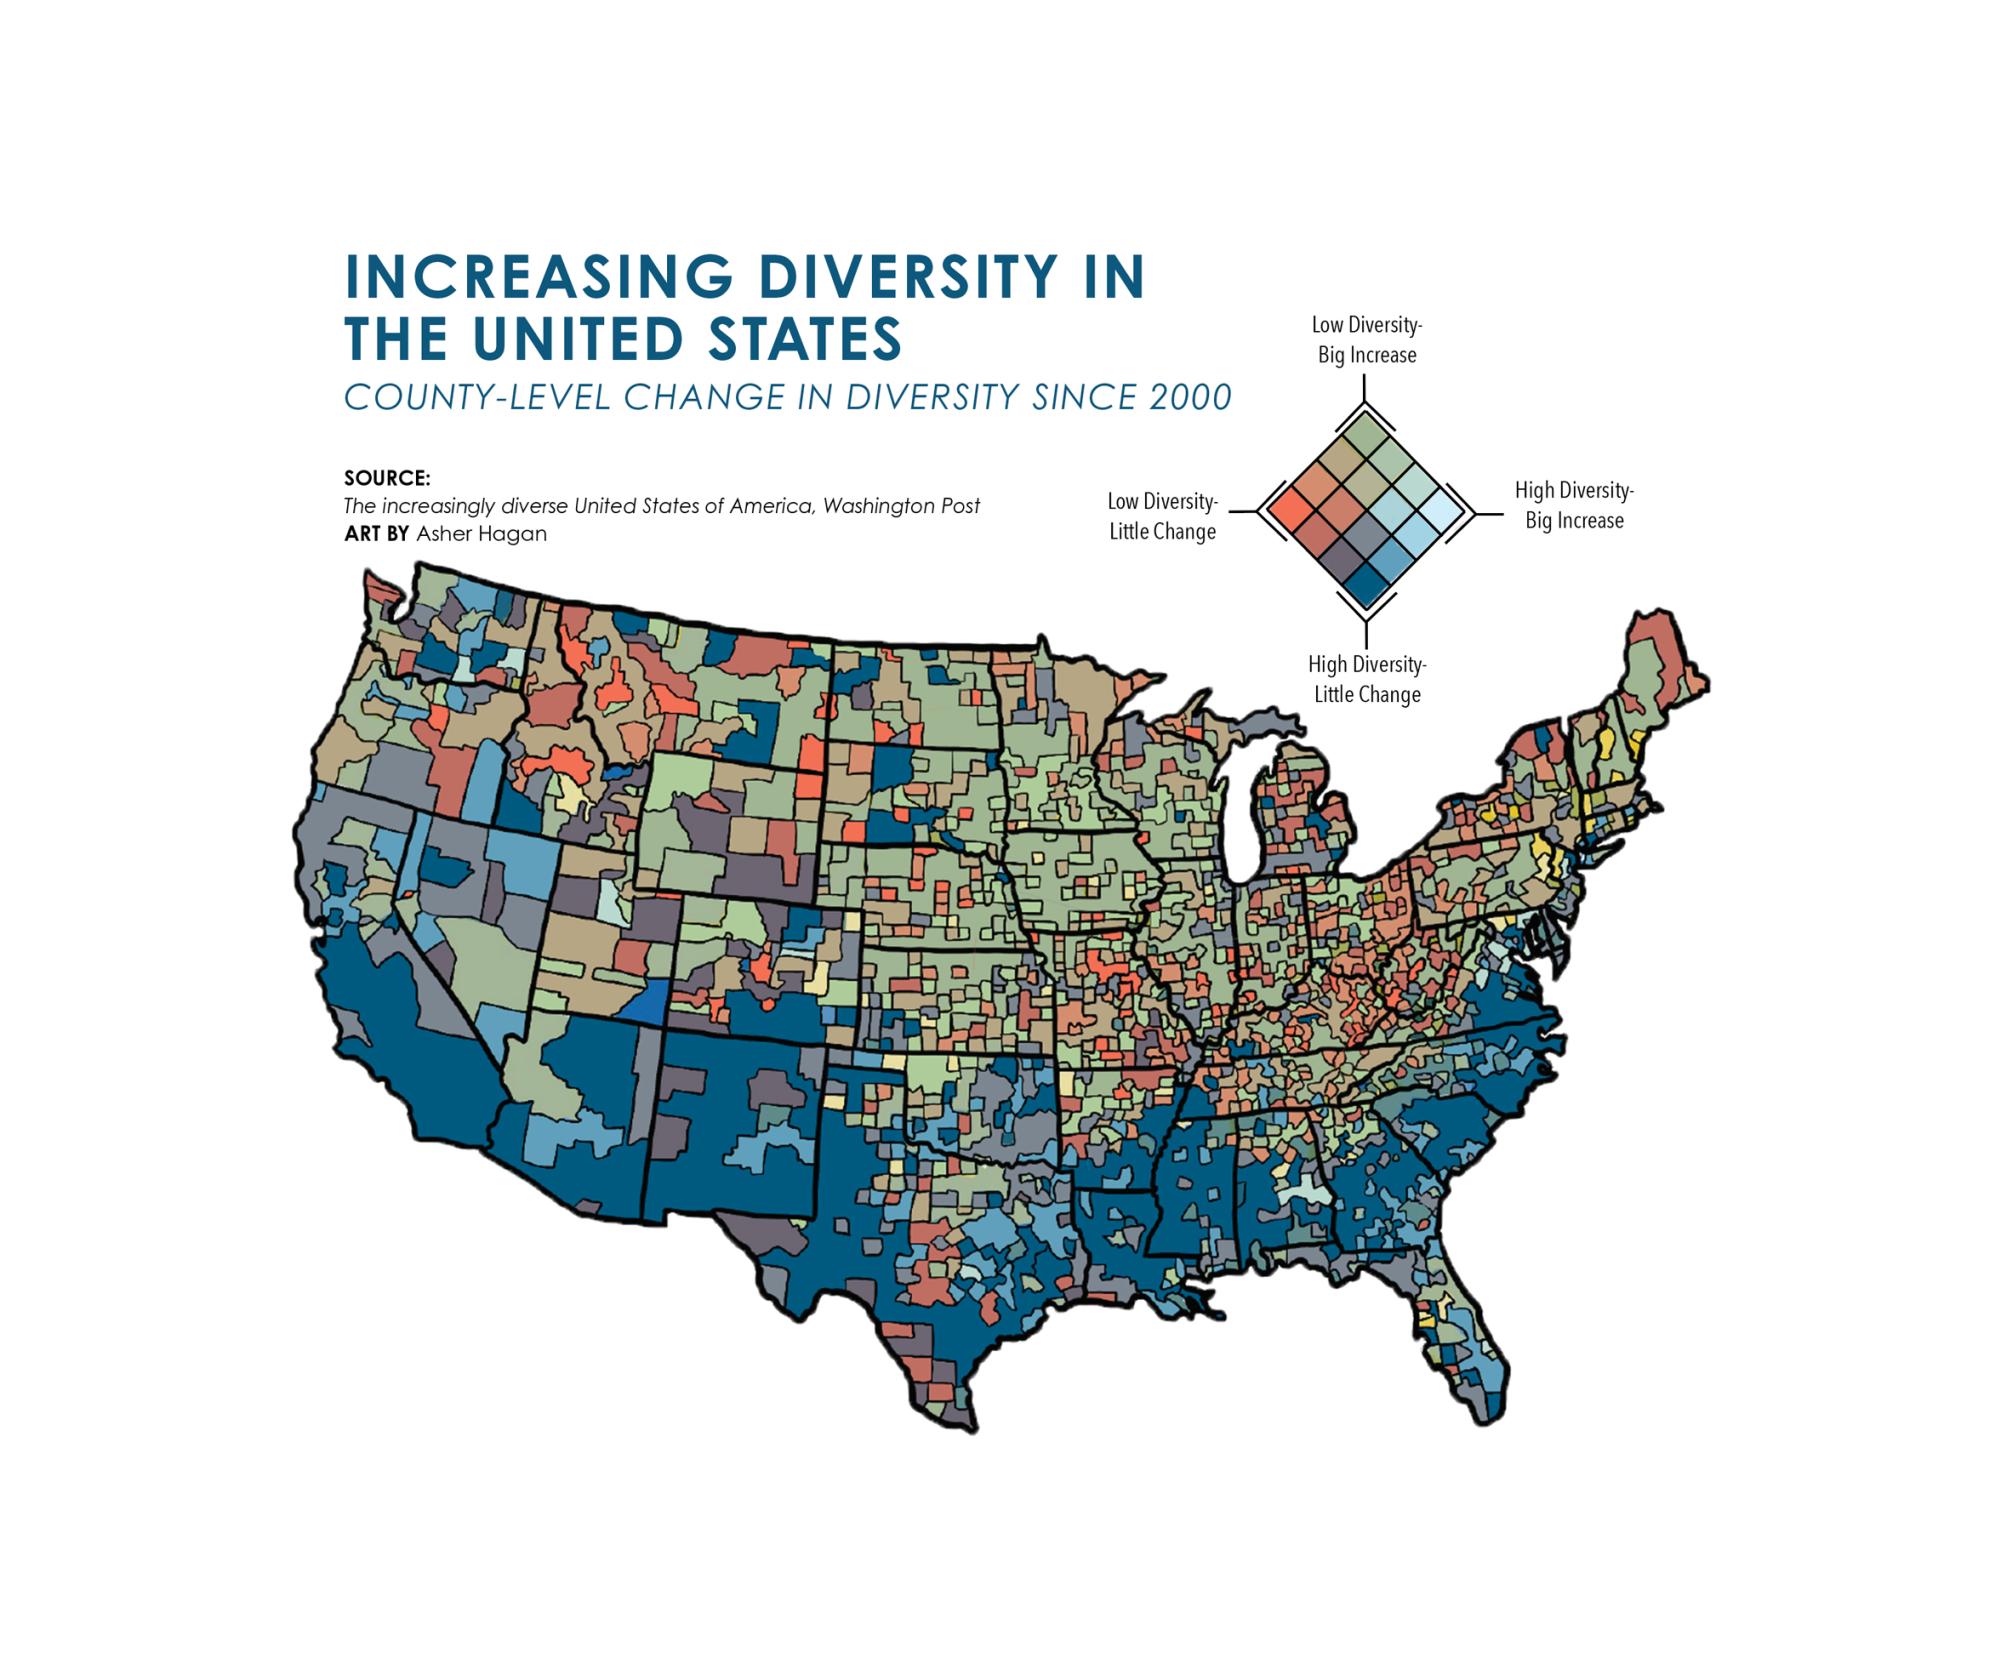 Source: The increasingly diverse United States of America, Washington Post